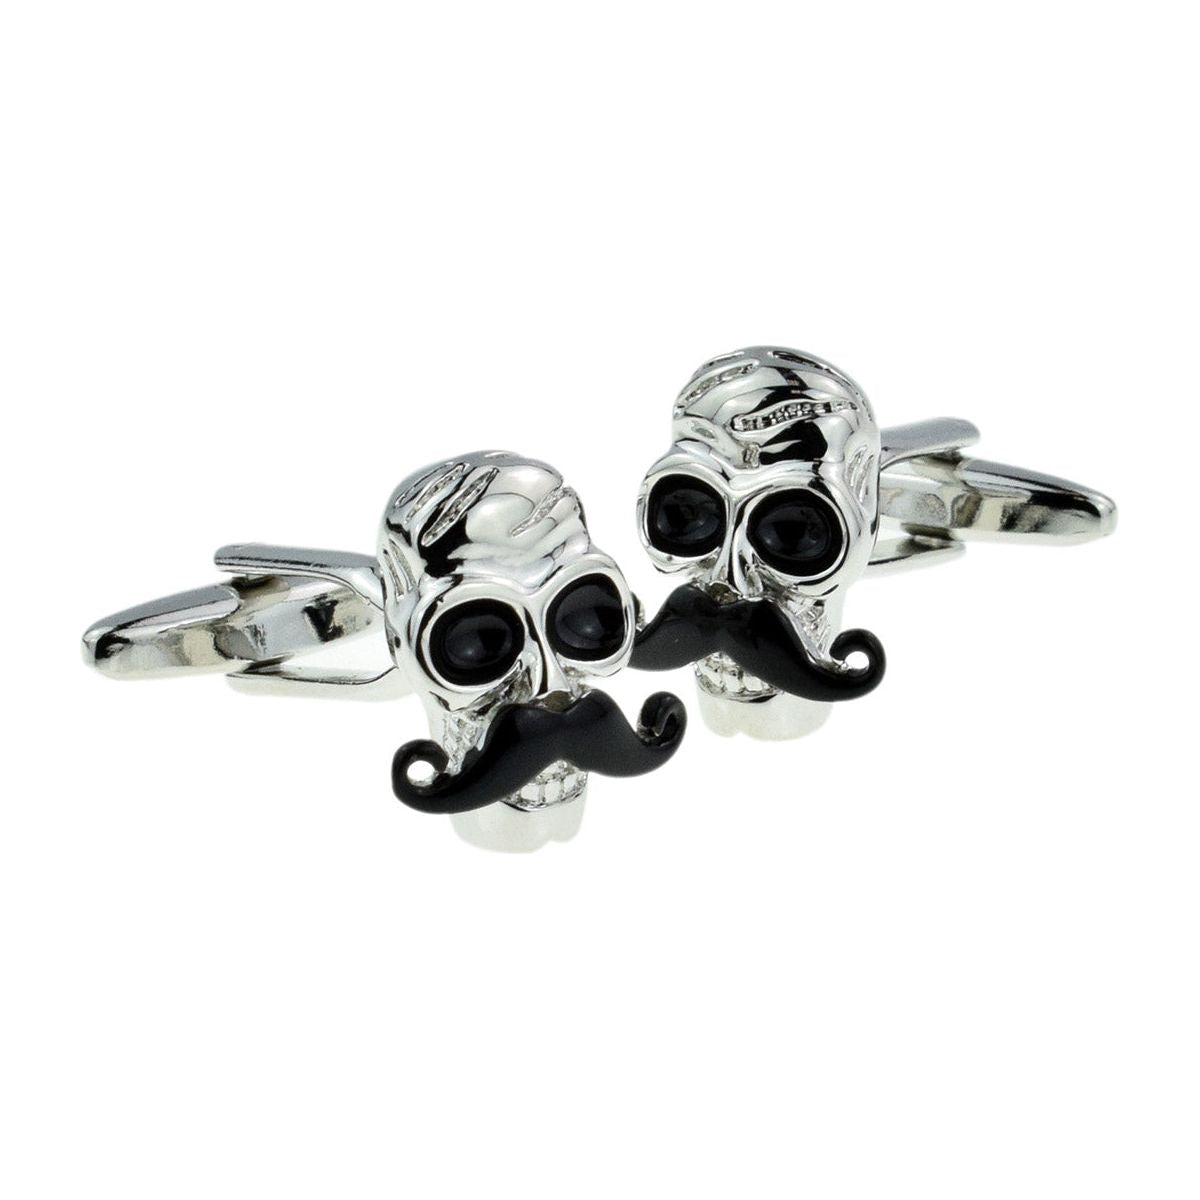 Skull with Moustache Cufflinks - Ashton and Finch